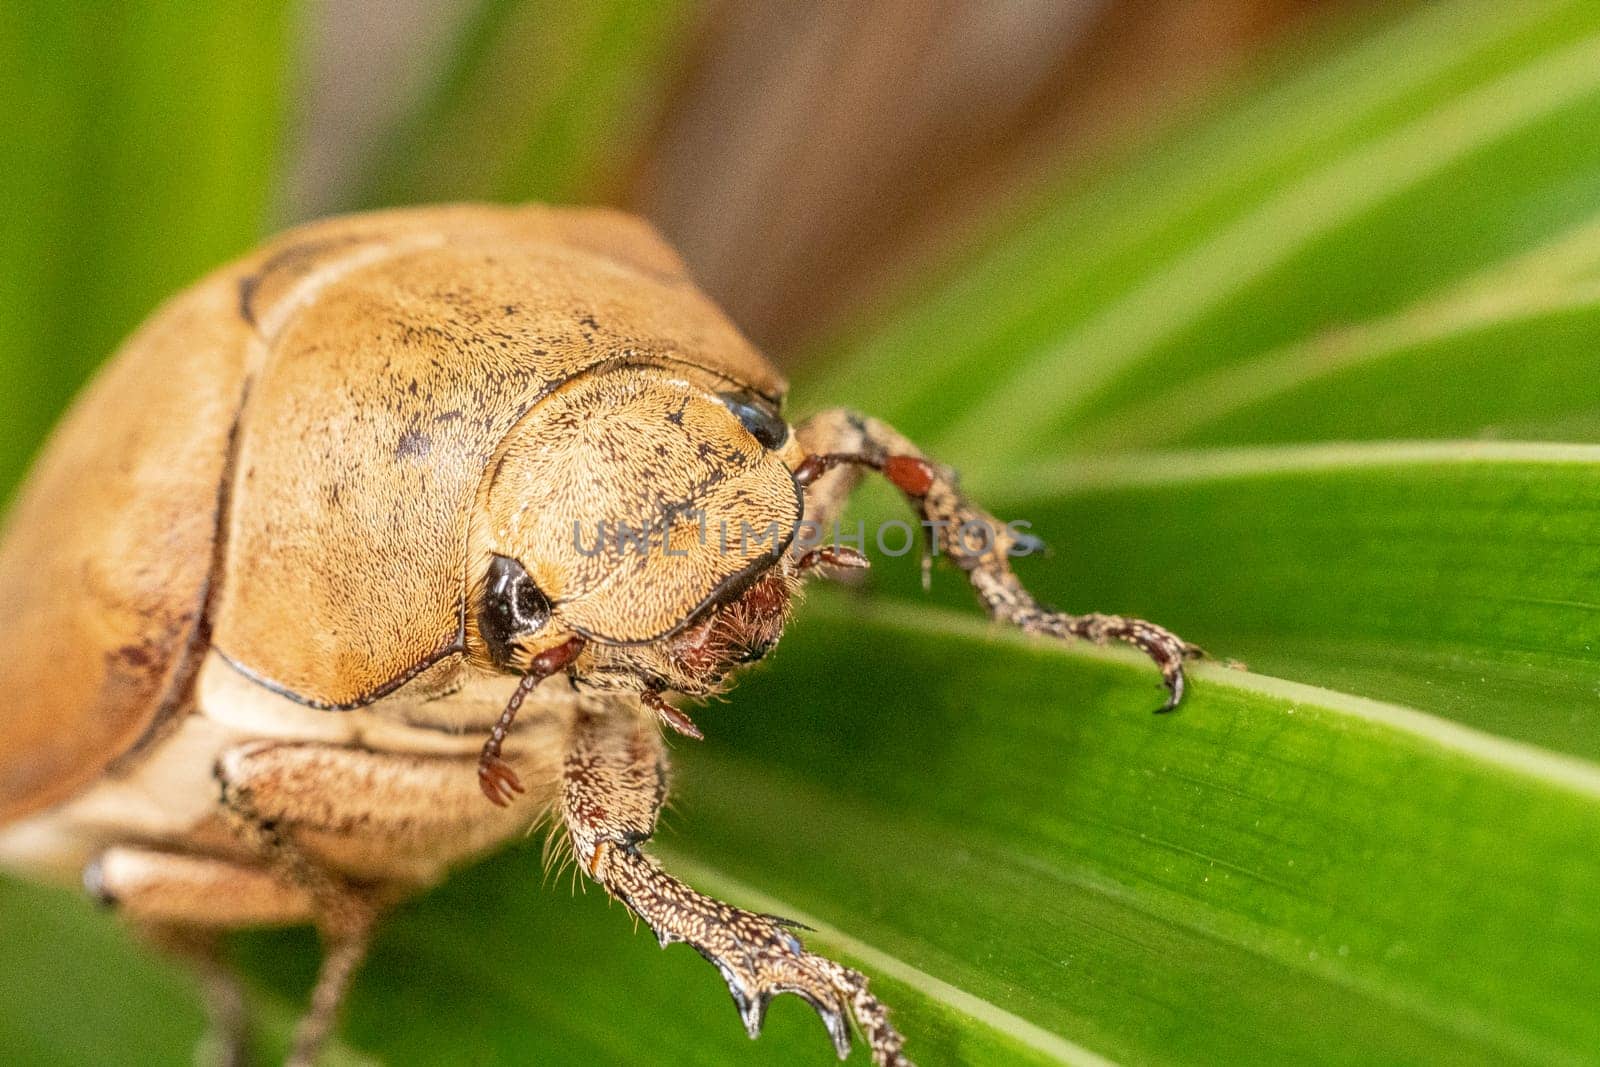 Close up light brown large Insect beetle. Interaction with wild nature beauty fauna Entomology image by nandrey85